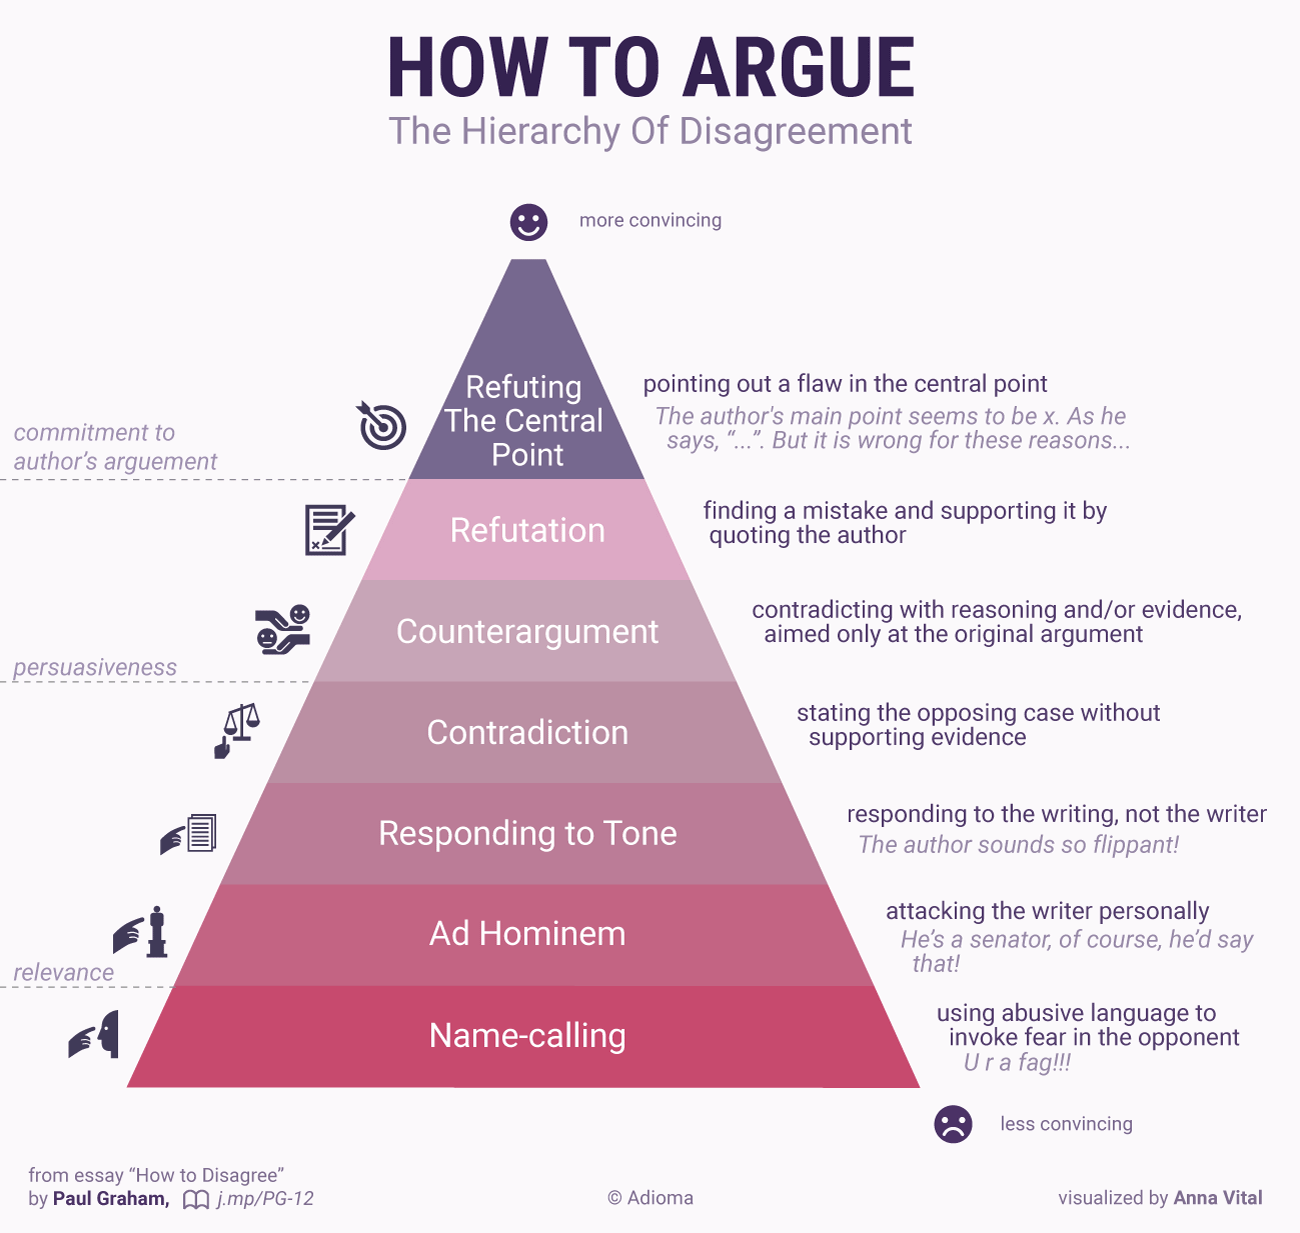 how-to-argue-PG-hierarhy-of-disagrement-infographic.png